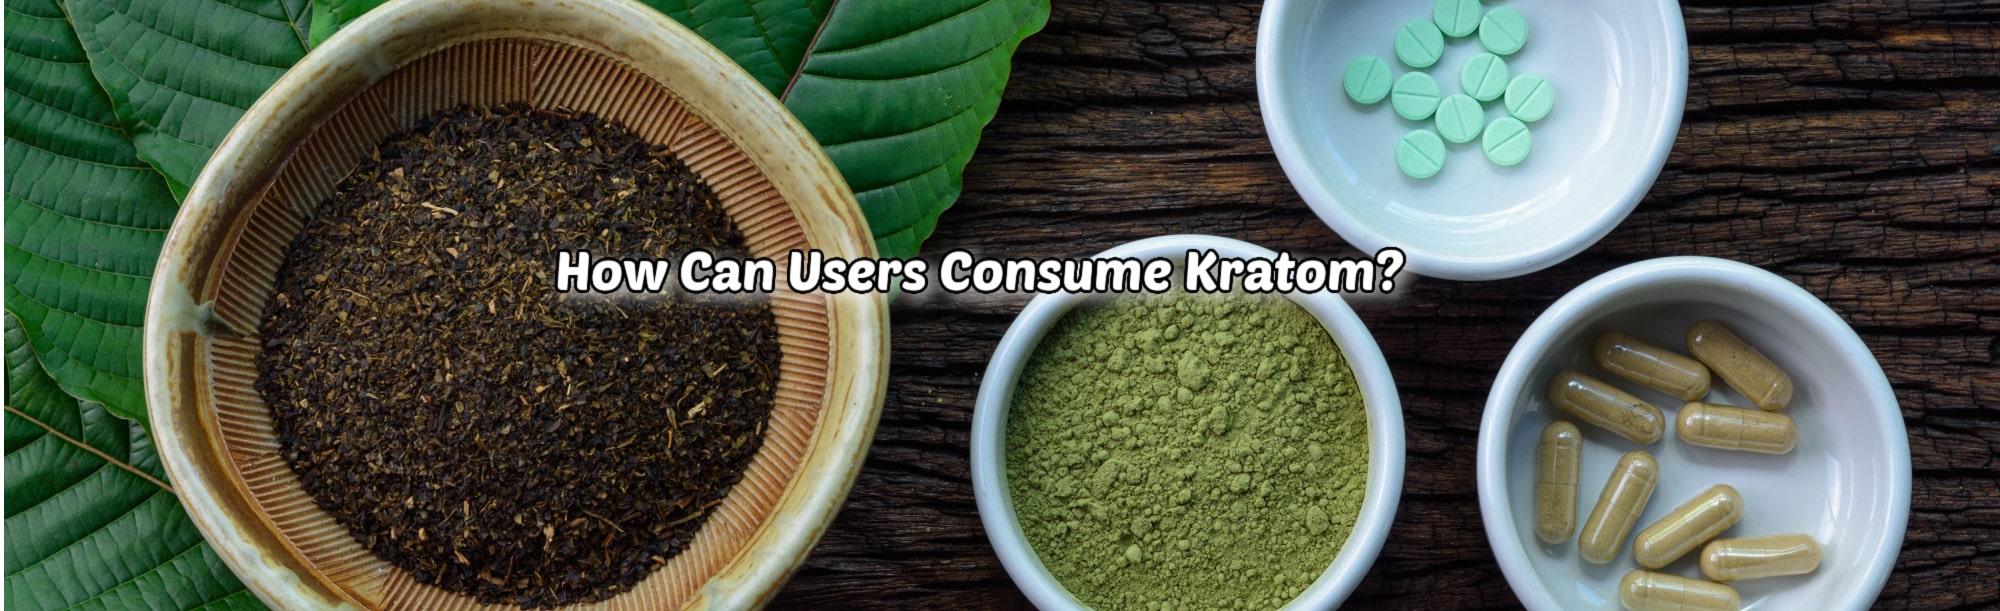 Can You Snort Kratom Powder? Understanding the Method, Risks, and Reasons People Do It